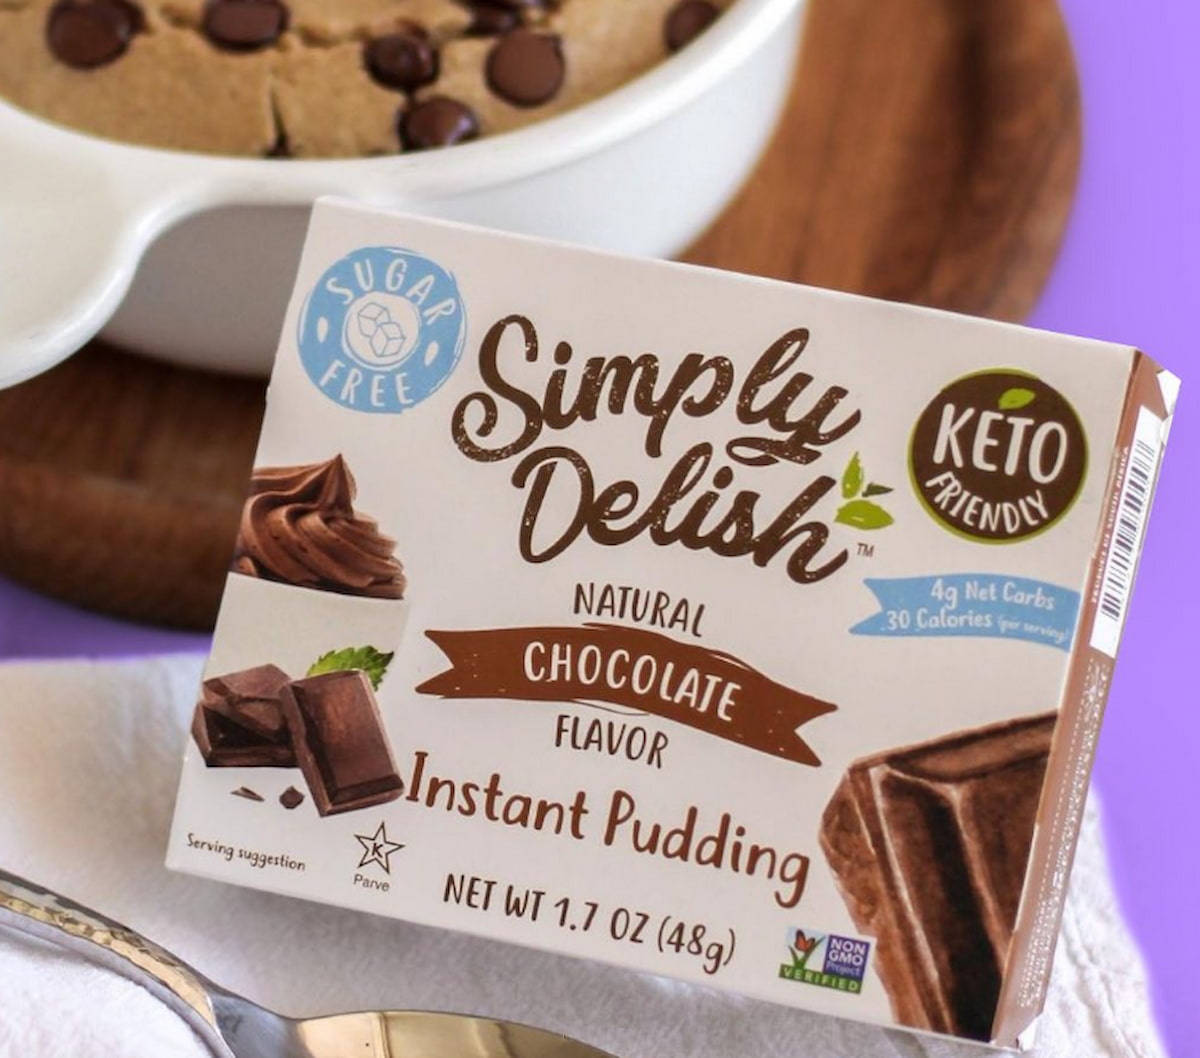 A package of Simply Delish plant-based pudding.